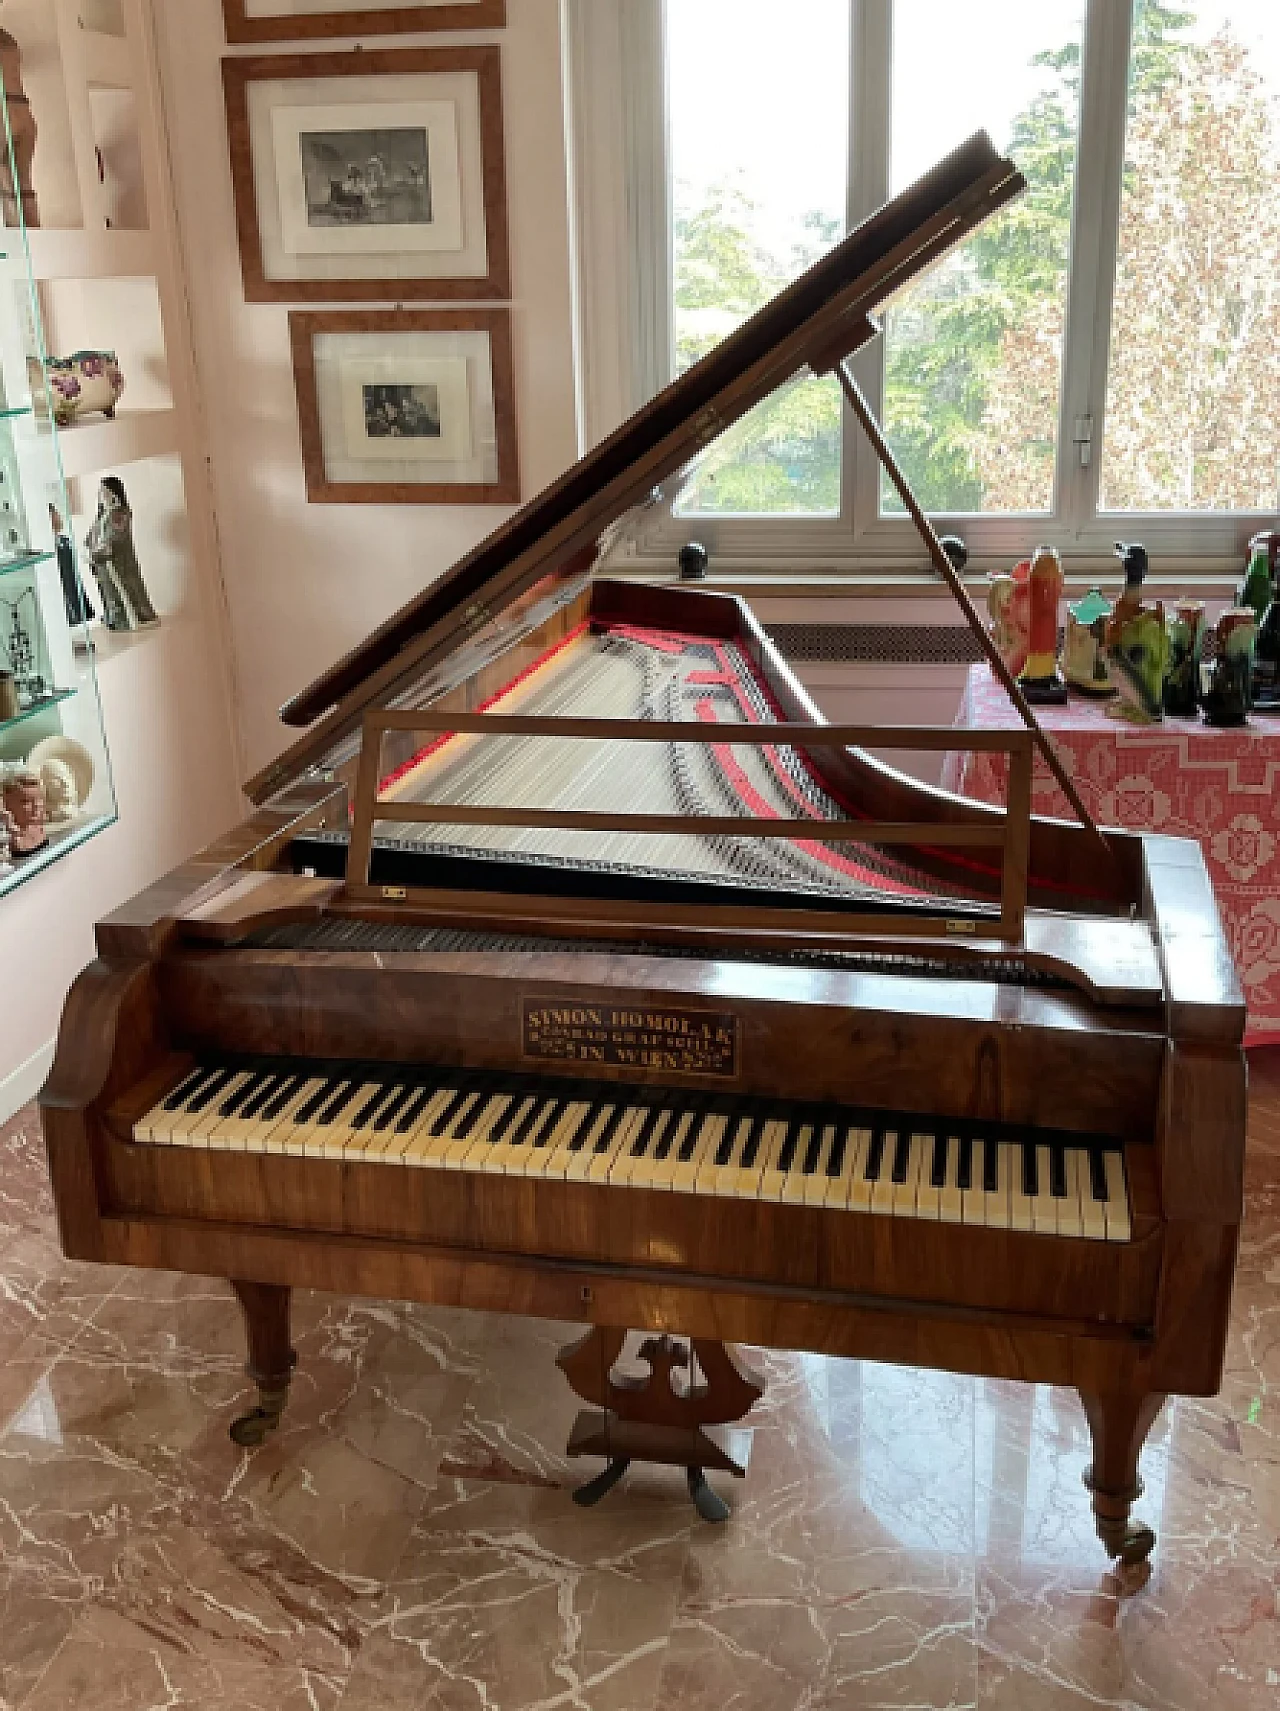 Grand piano by Simon Homolak, first quarter of the 19th century 1